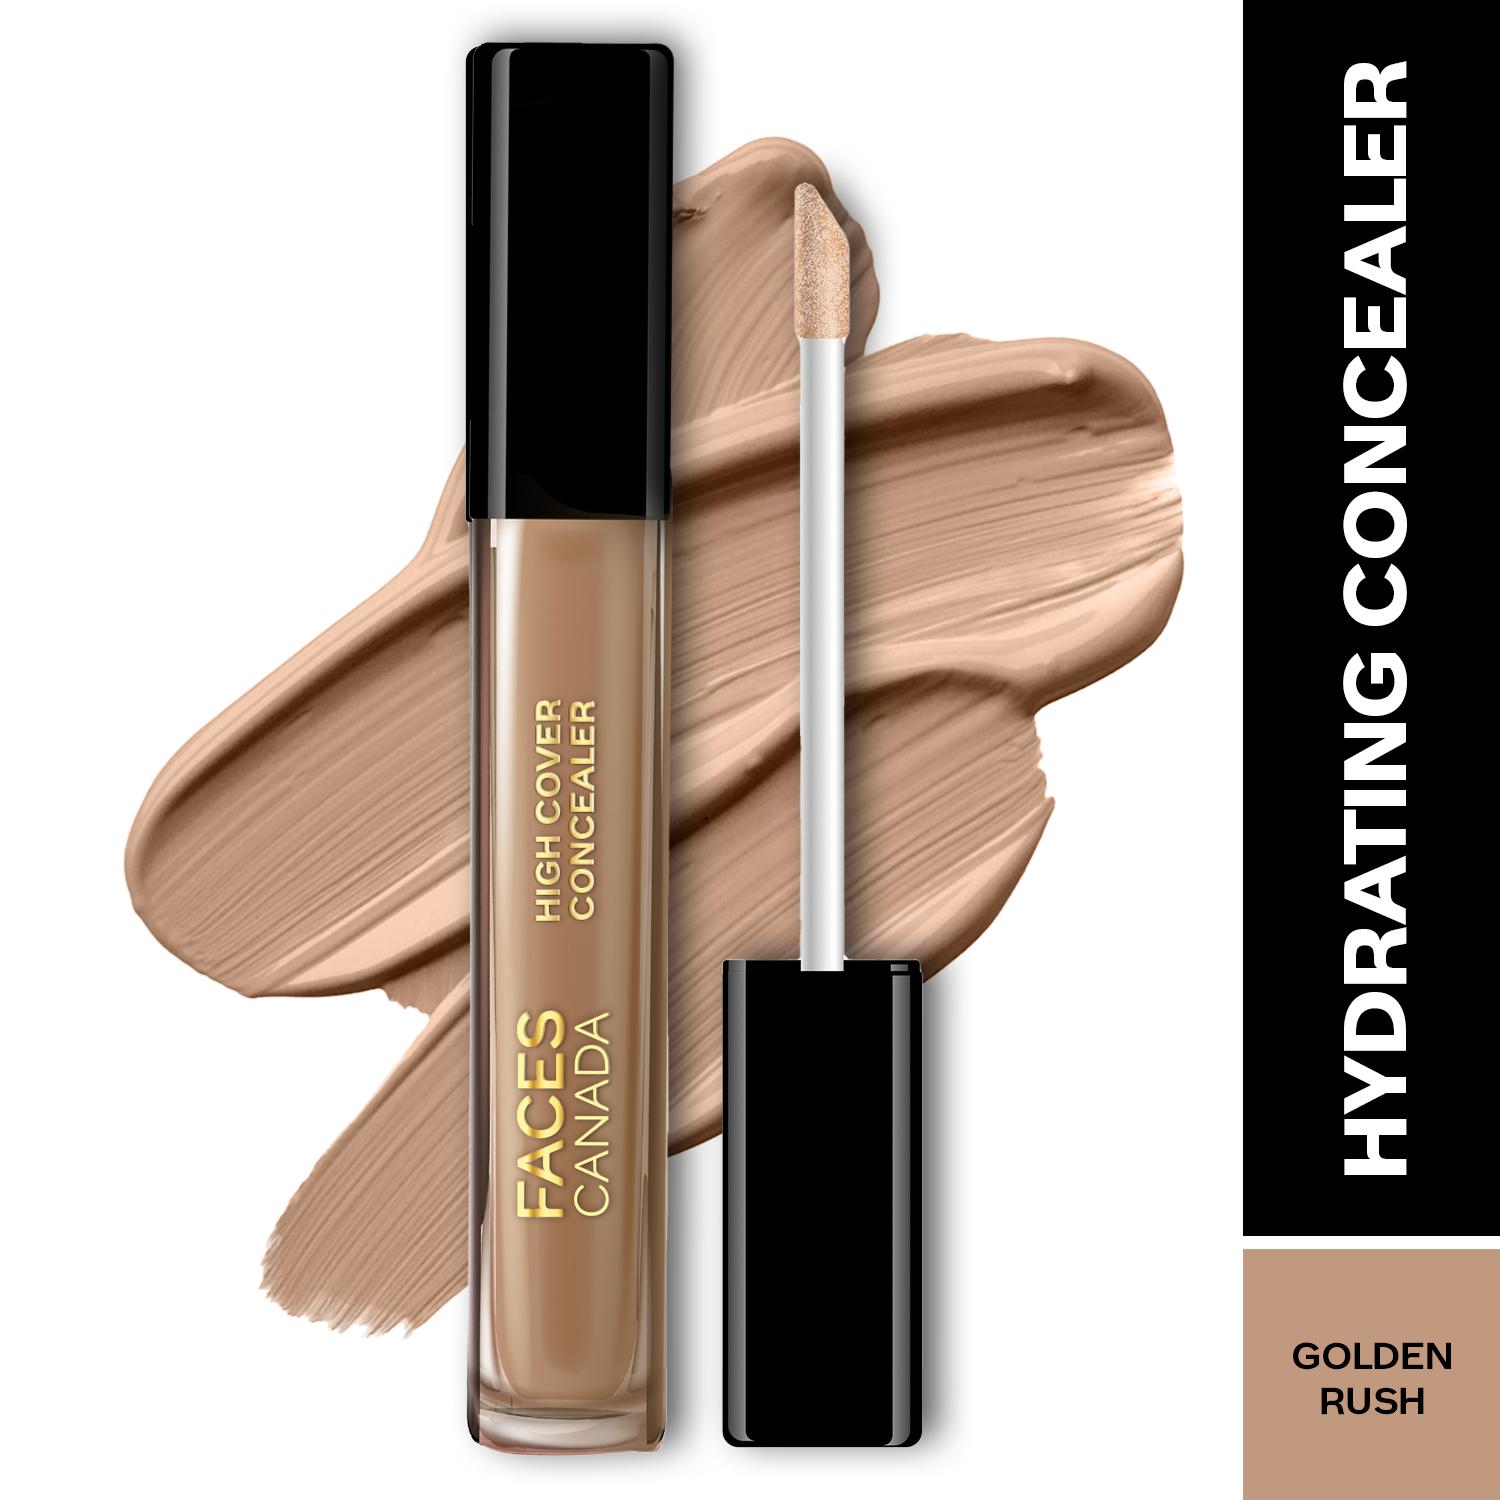 Faces Canada | Faces Canada High Cover Concealer - Golden Rush 06, Blends Easily, Natural Finish (4 ml)